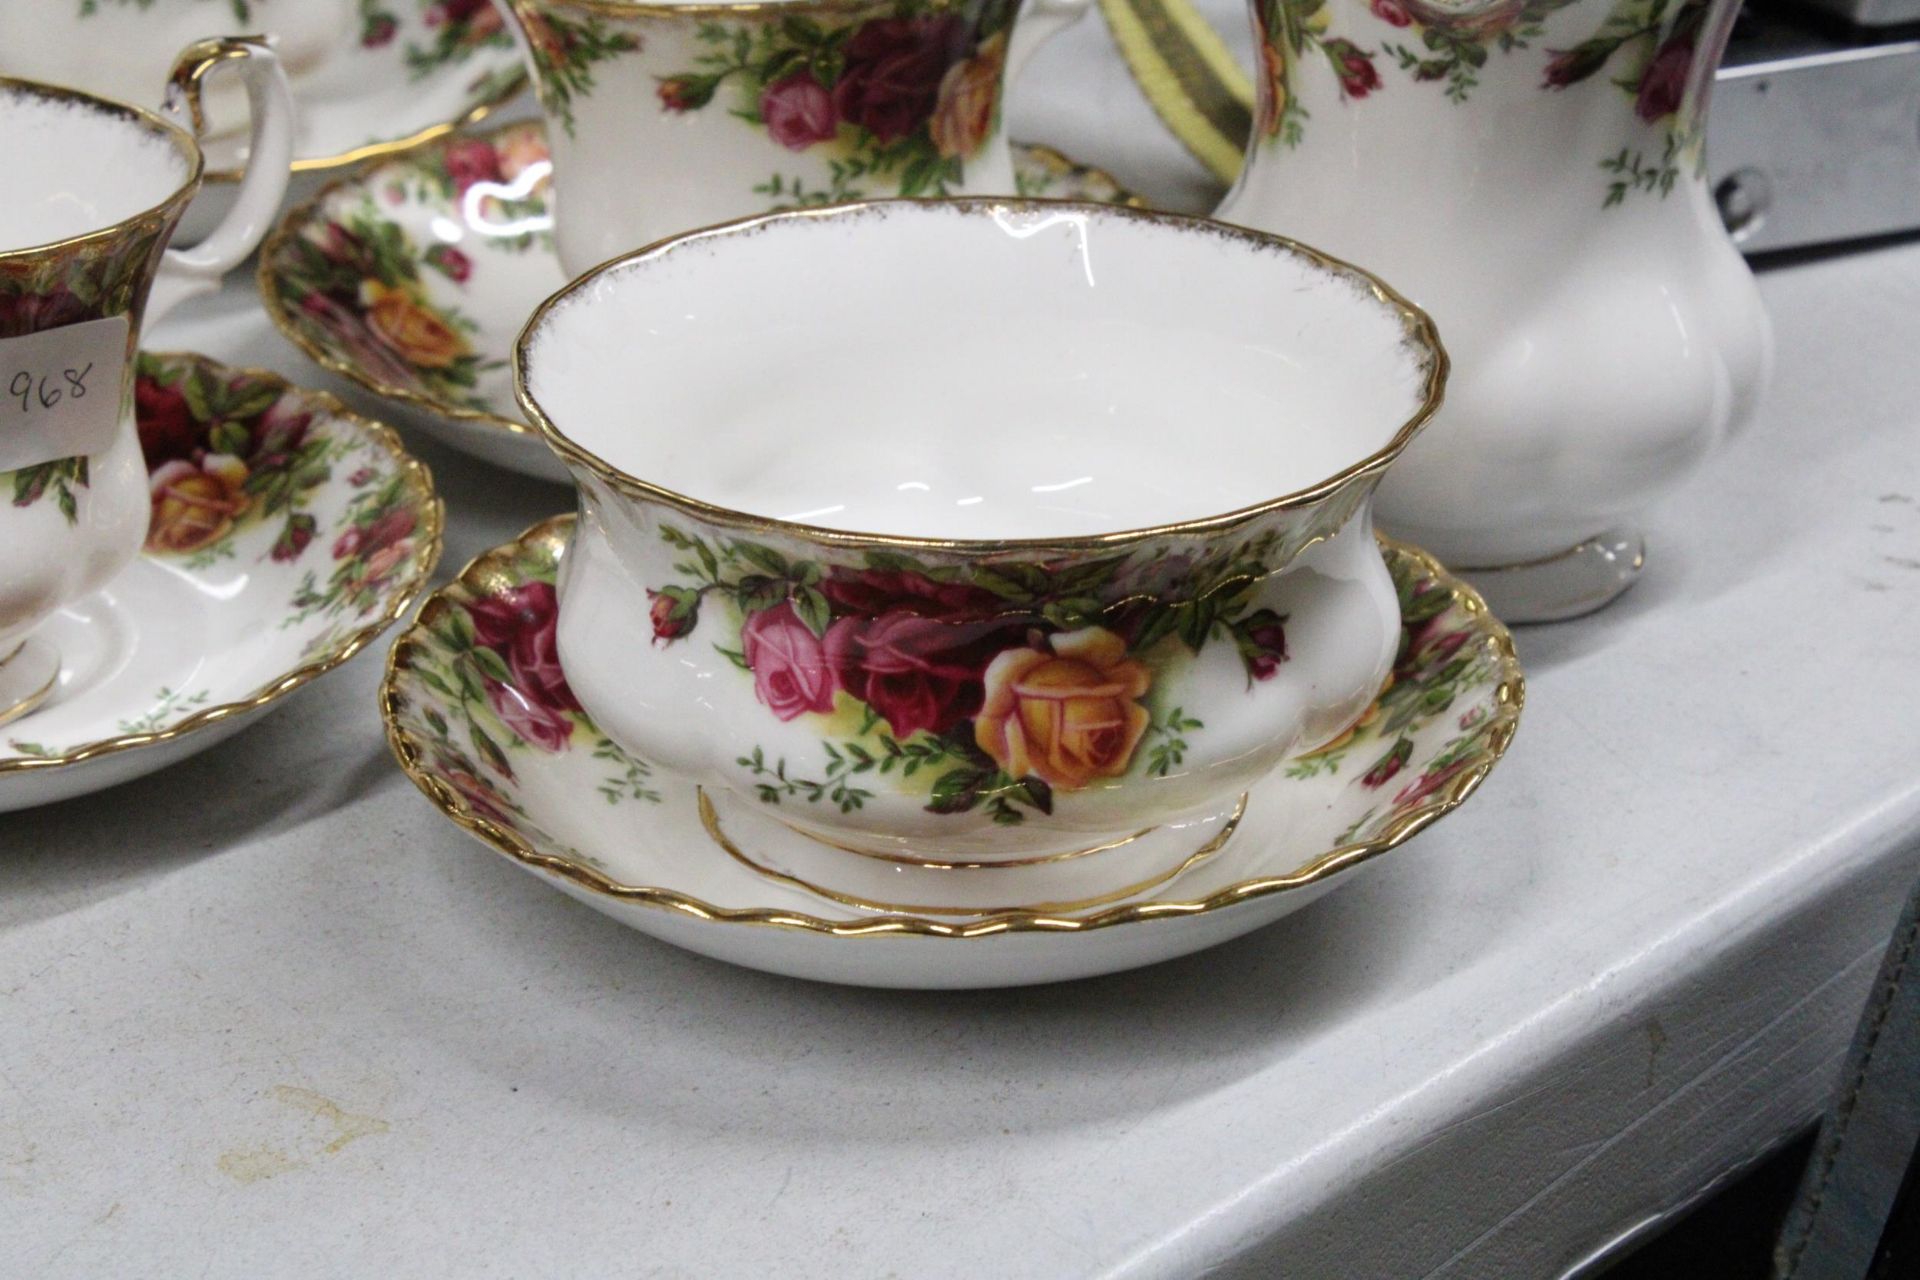 A QUANTITY OF ROYAL ALBERT 'OLD COUNTRY ROSES' TO INCLUDE CUPS, SAUCERS, A CREAM JUG AND SUGAR BOWL - Image 2 of 6